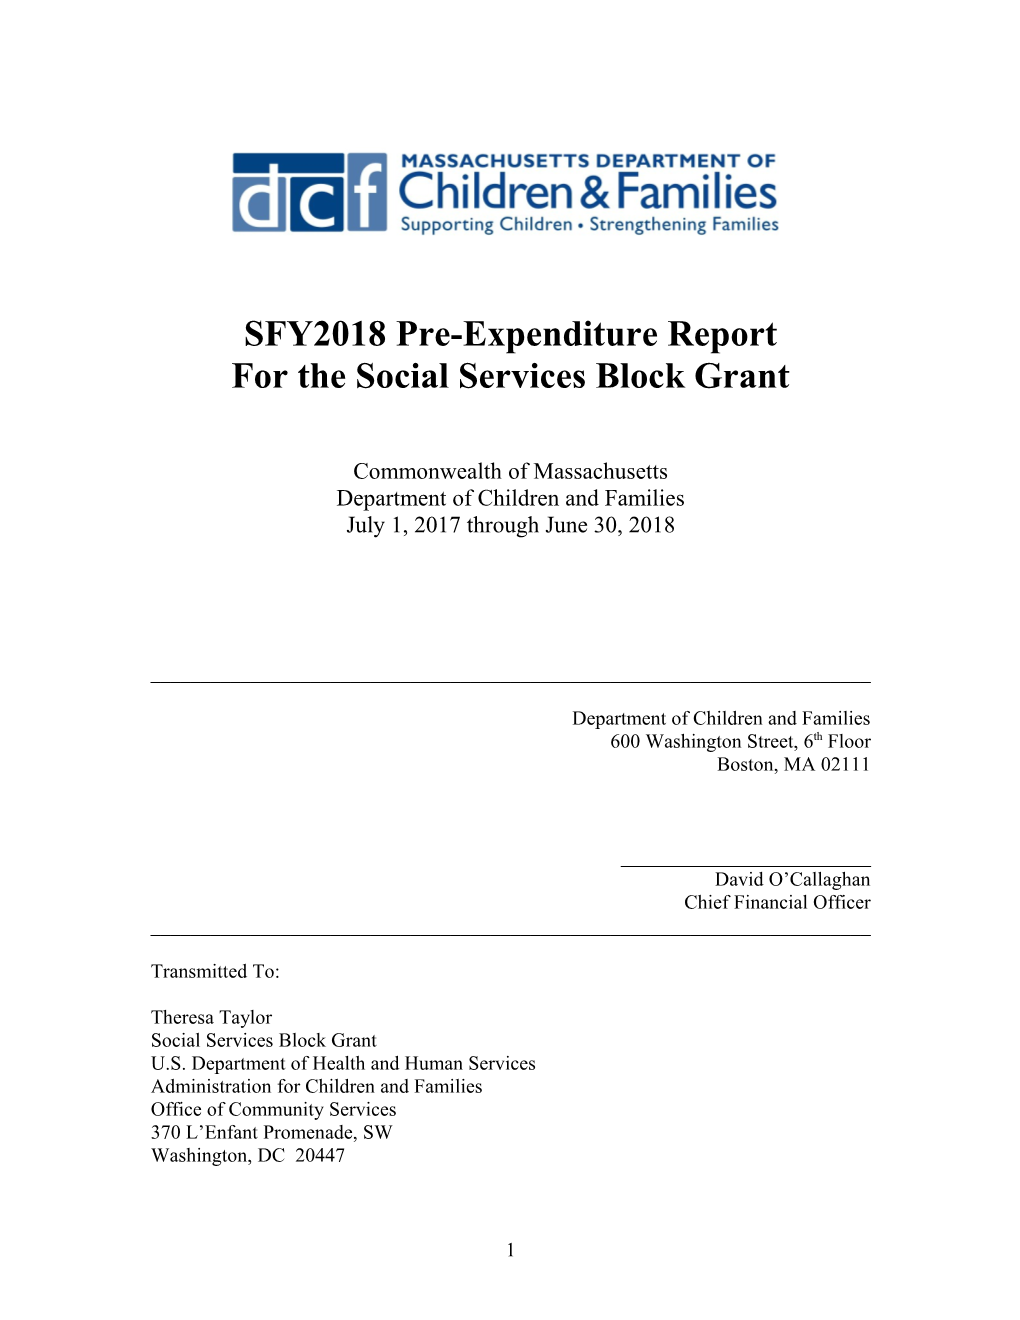 SFY2018 Pre-Expenditure Report for the Social Services Block Grant